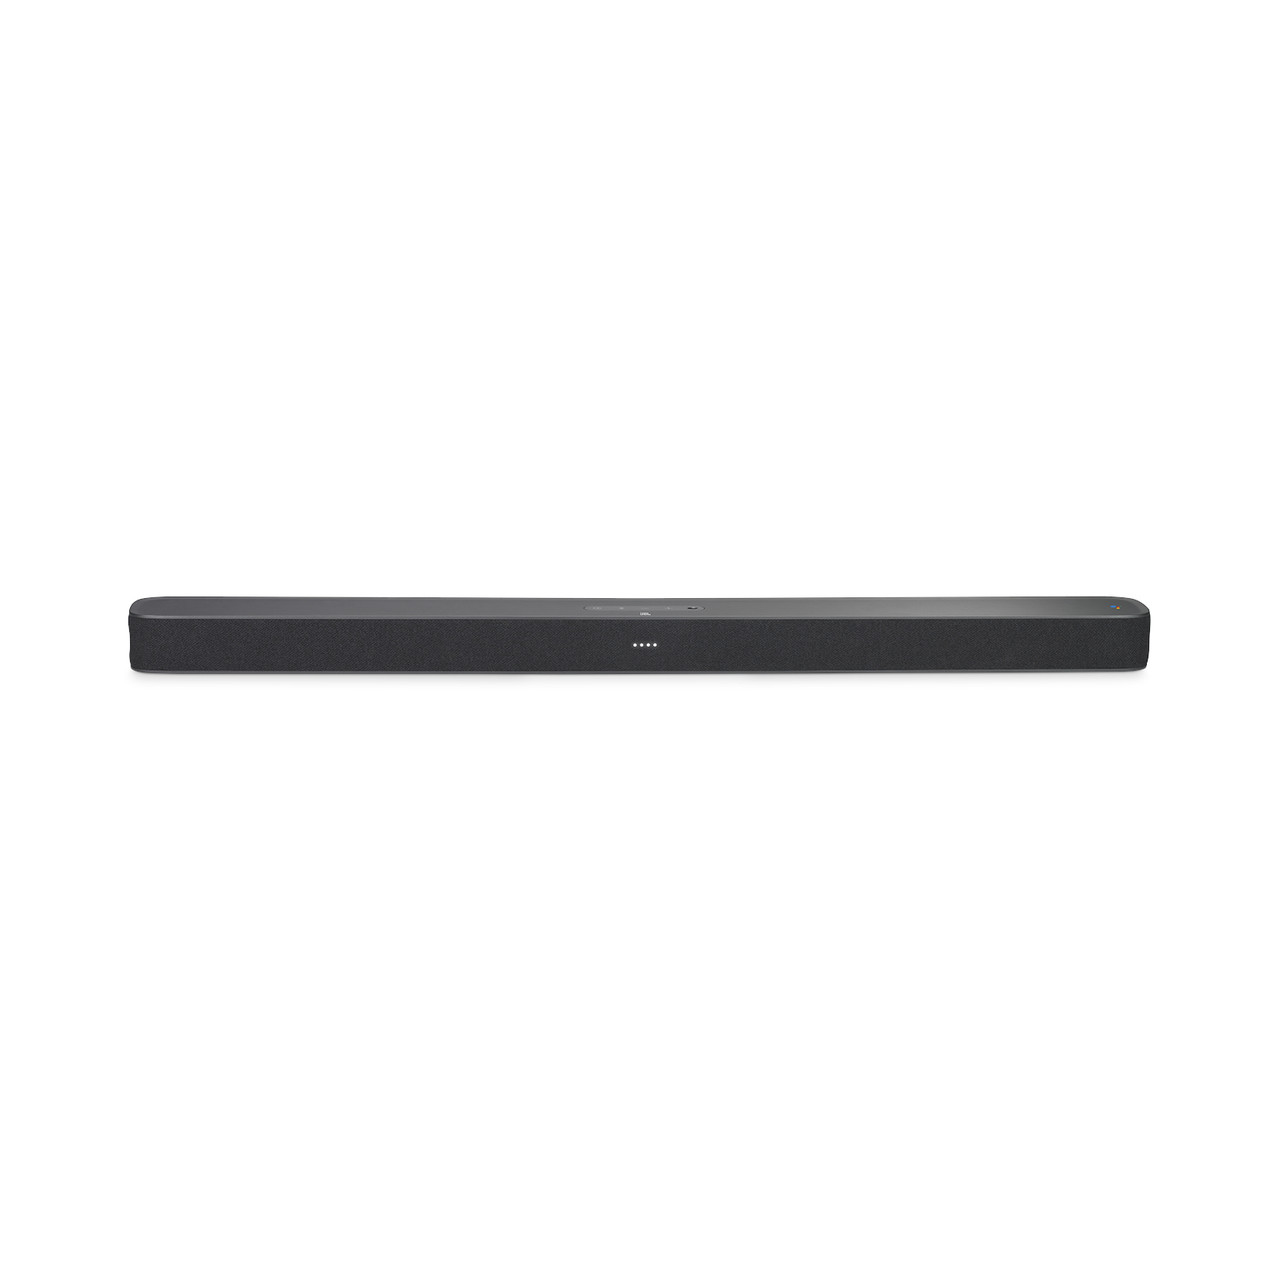 Shop JBL Voice-Activated Soundbar with Android TV and the Google Assistant Built-In